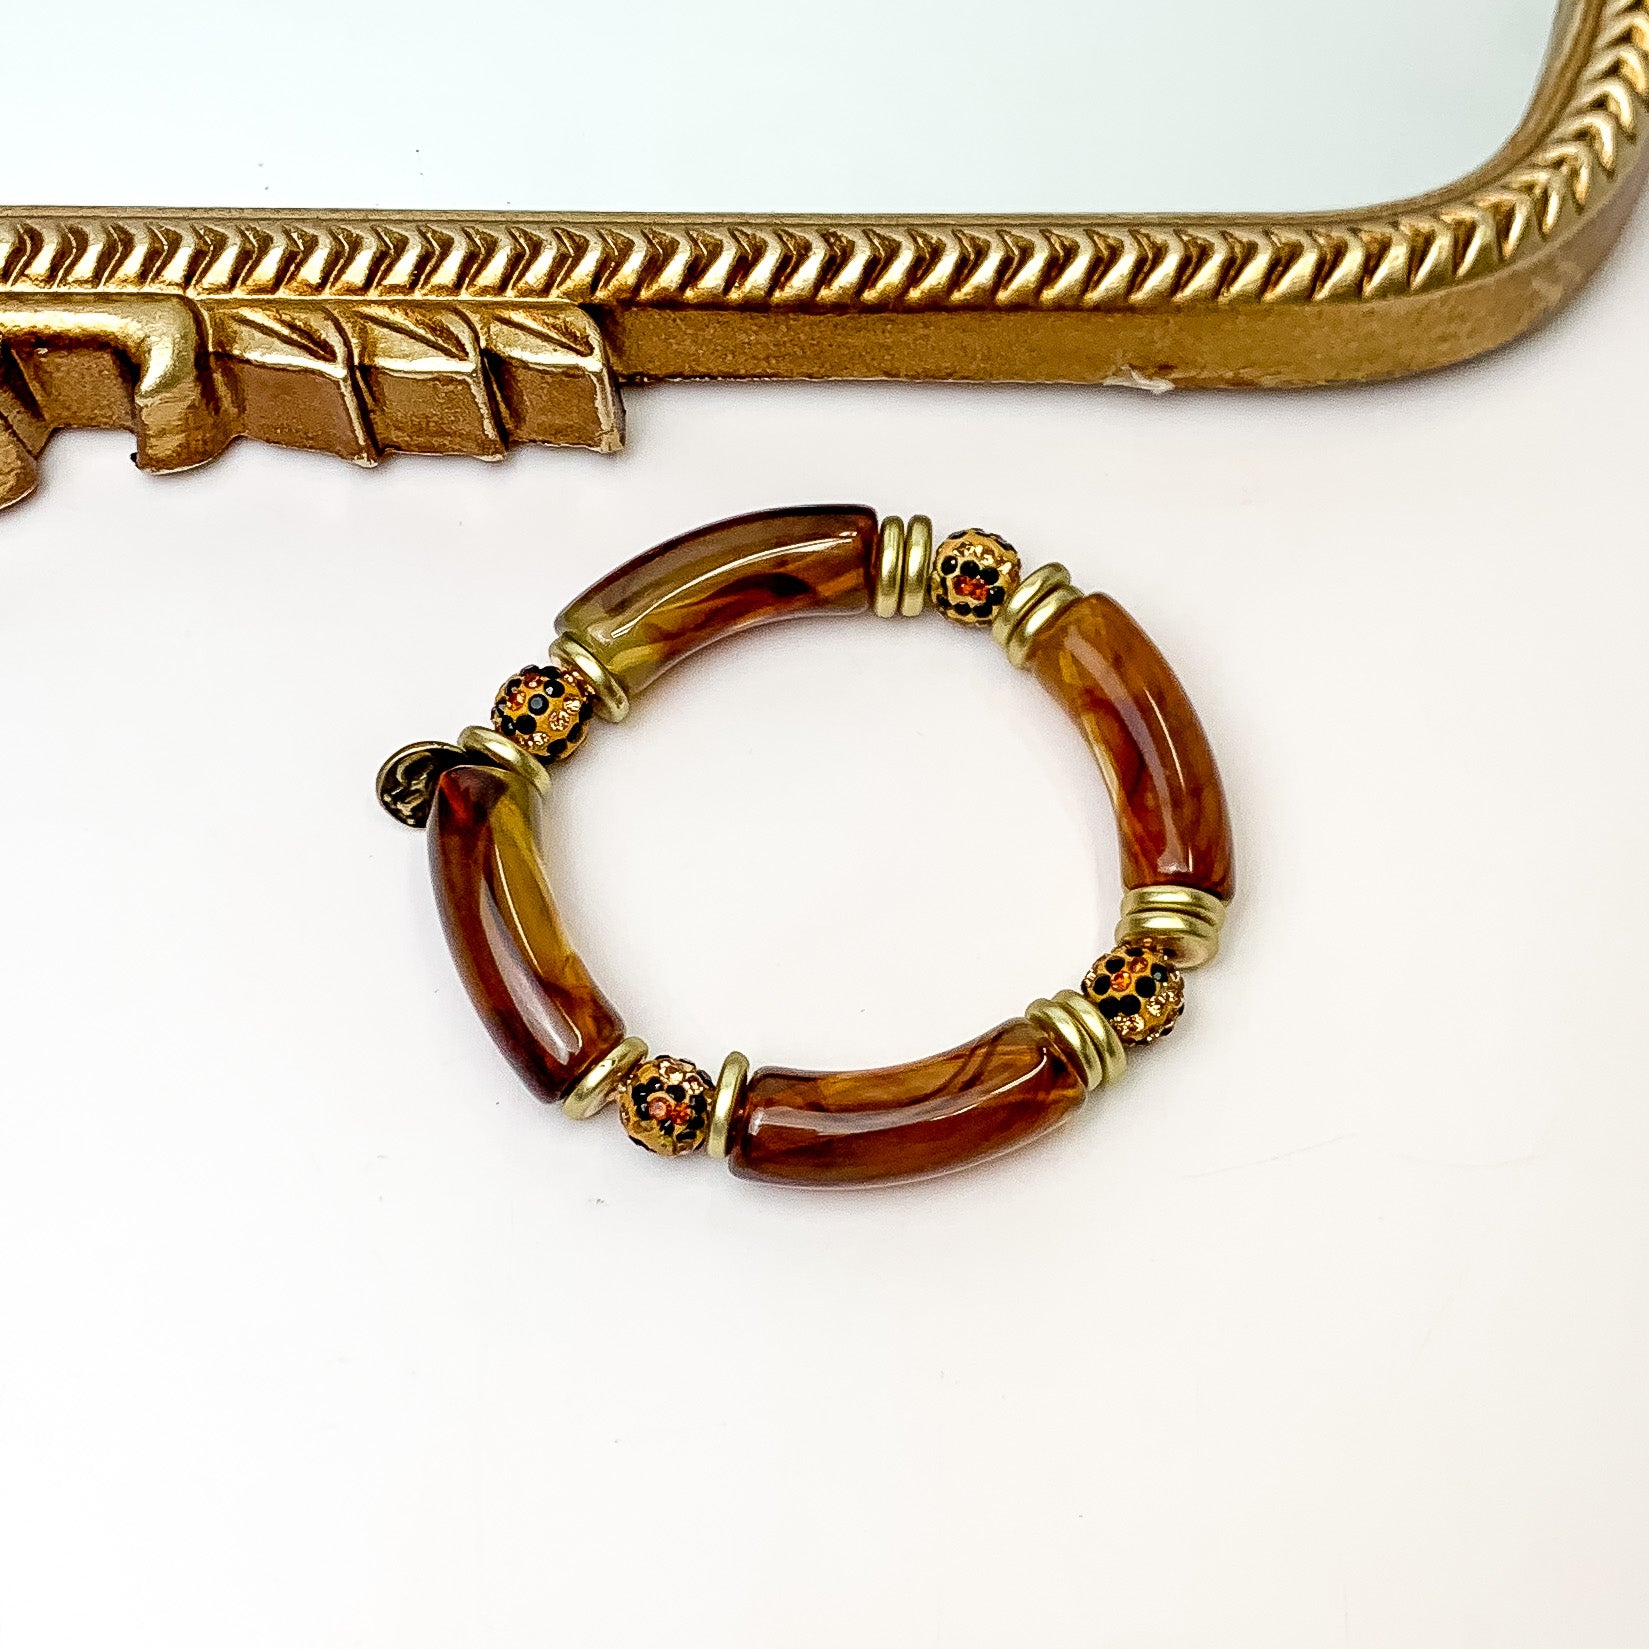 Pictured is one bracelet that has a tortoise print bamboo beads, gold beads, and crystal beads. This bracelet is pictured in front of a gold mirror on a white background. 